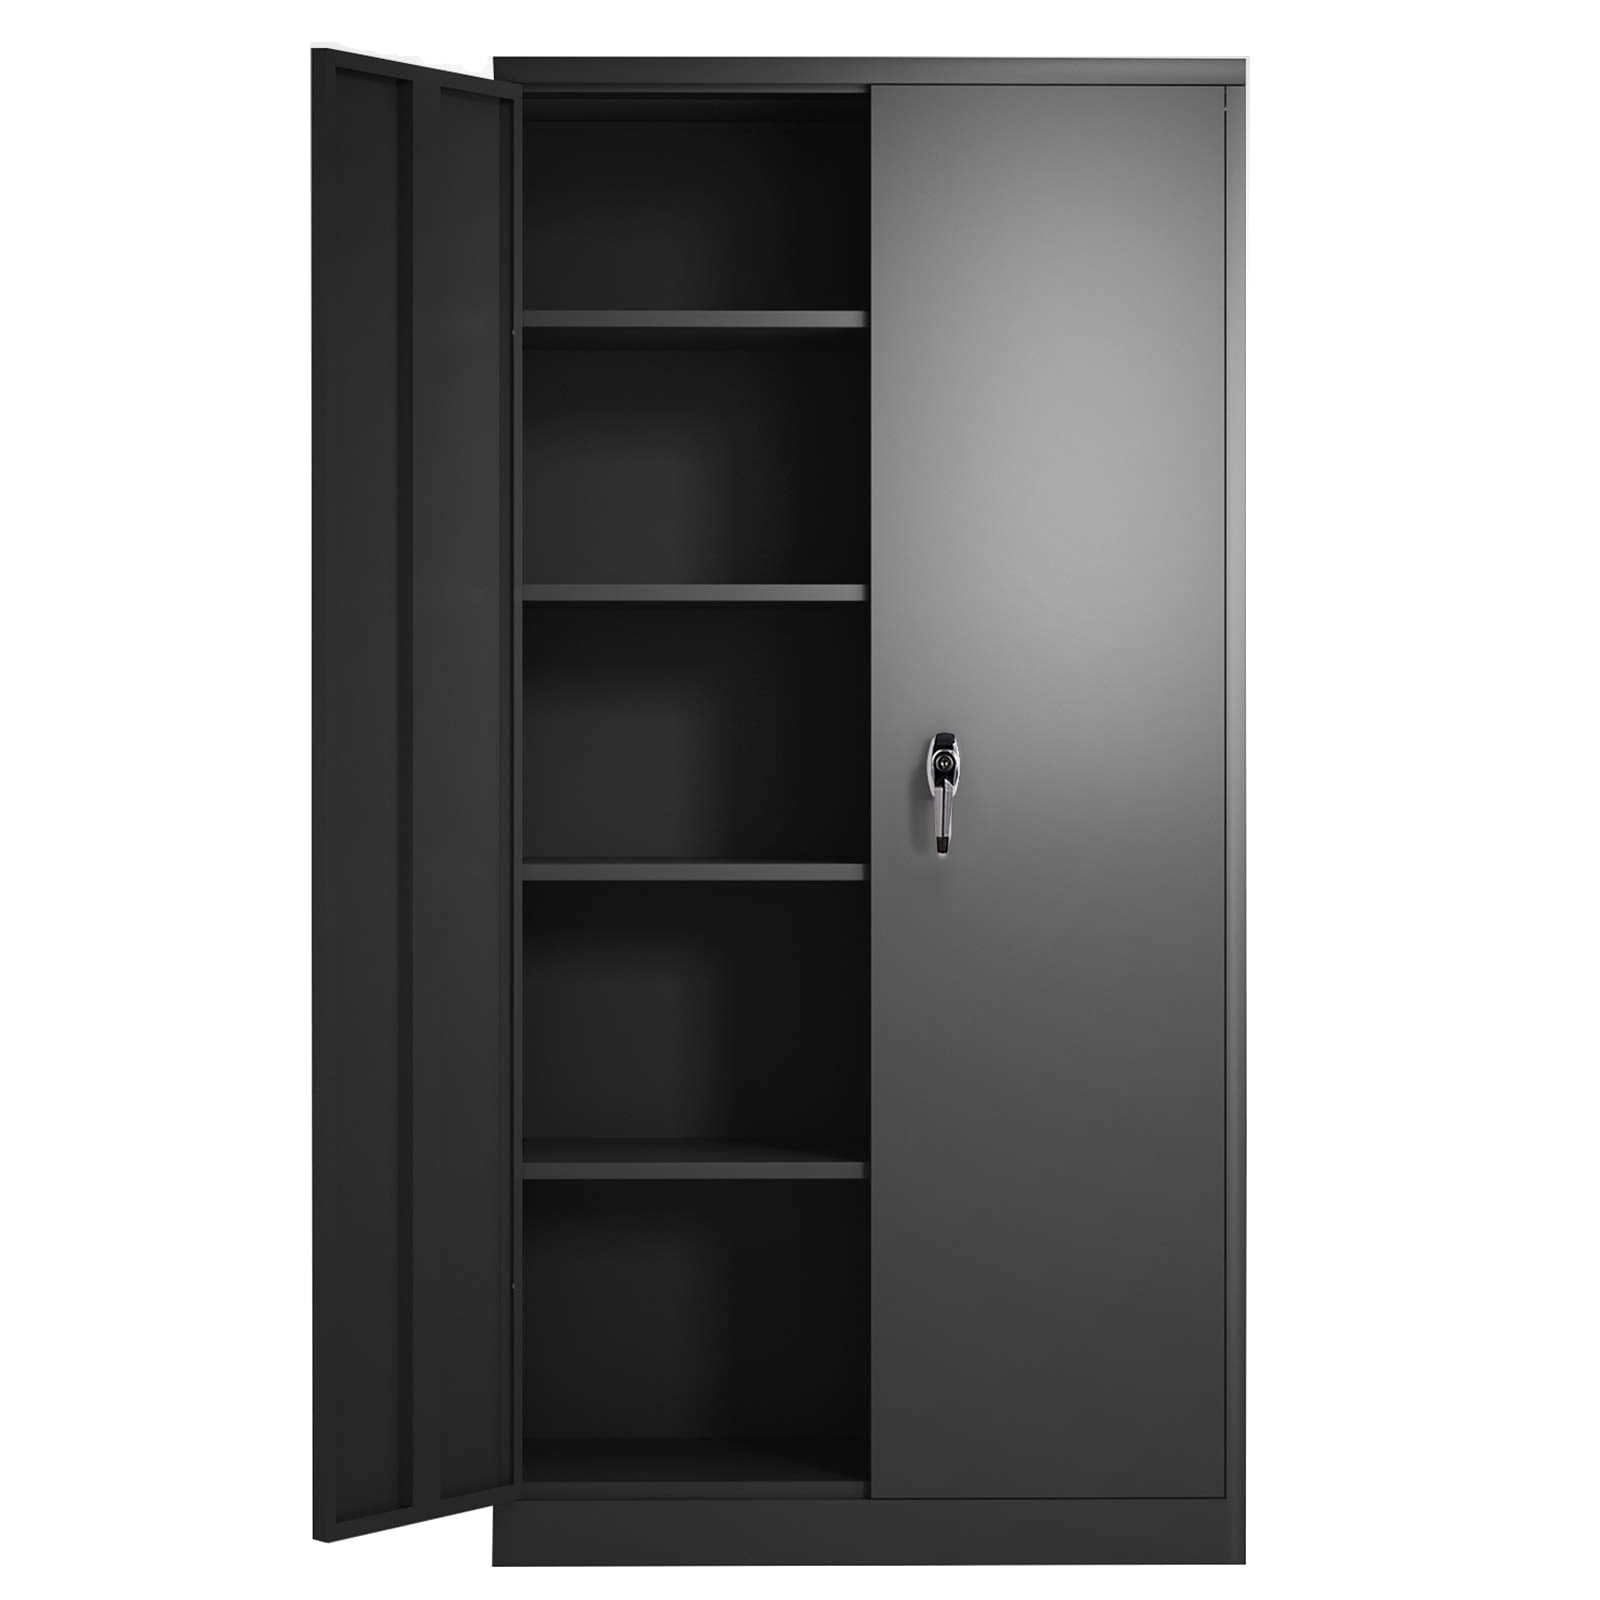 Panana Metal Office Filing Cabinet Tall Storage Cupboard Document Compartments Lockable Double Doors Adjustable Shelves 4 Tier Black